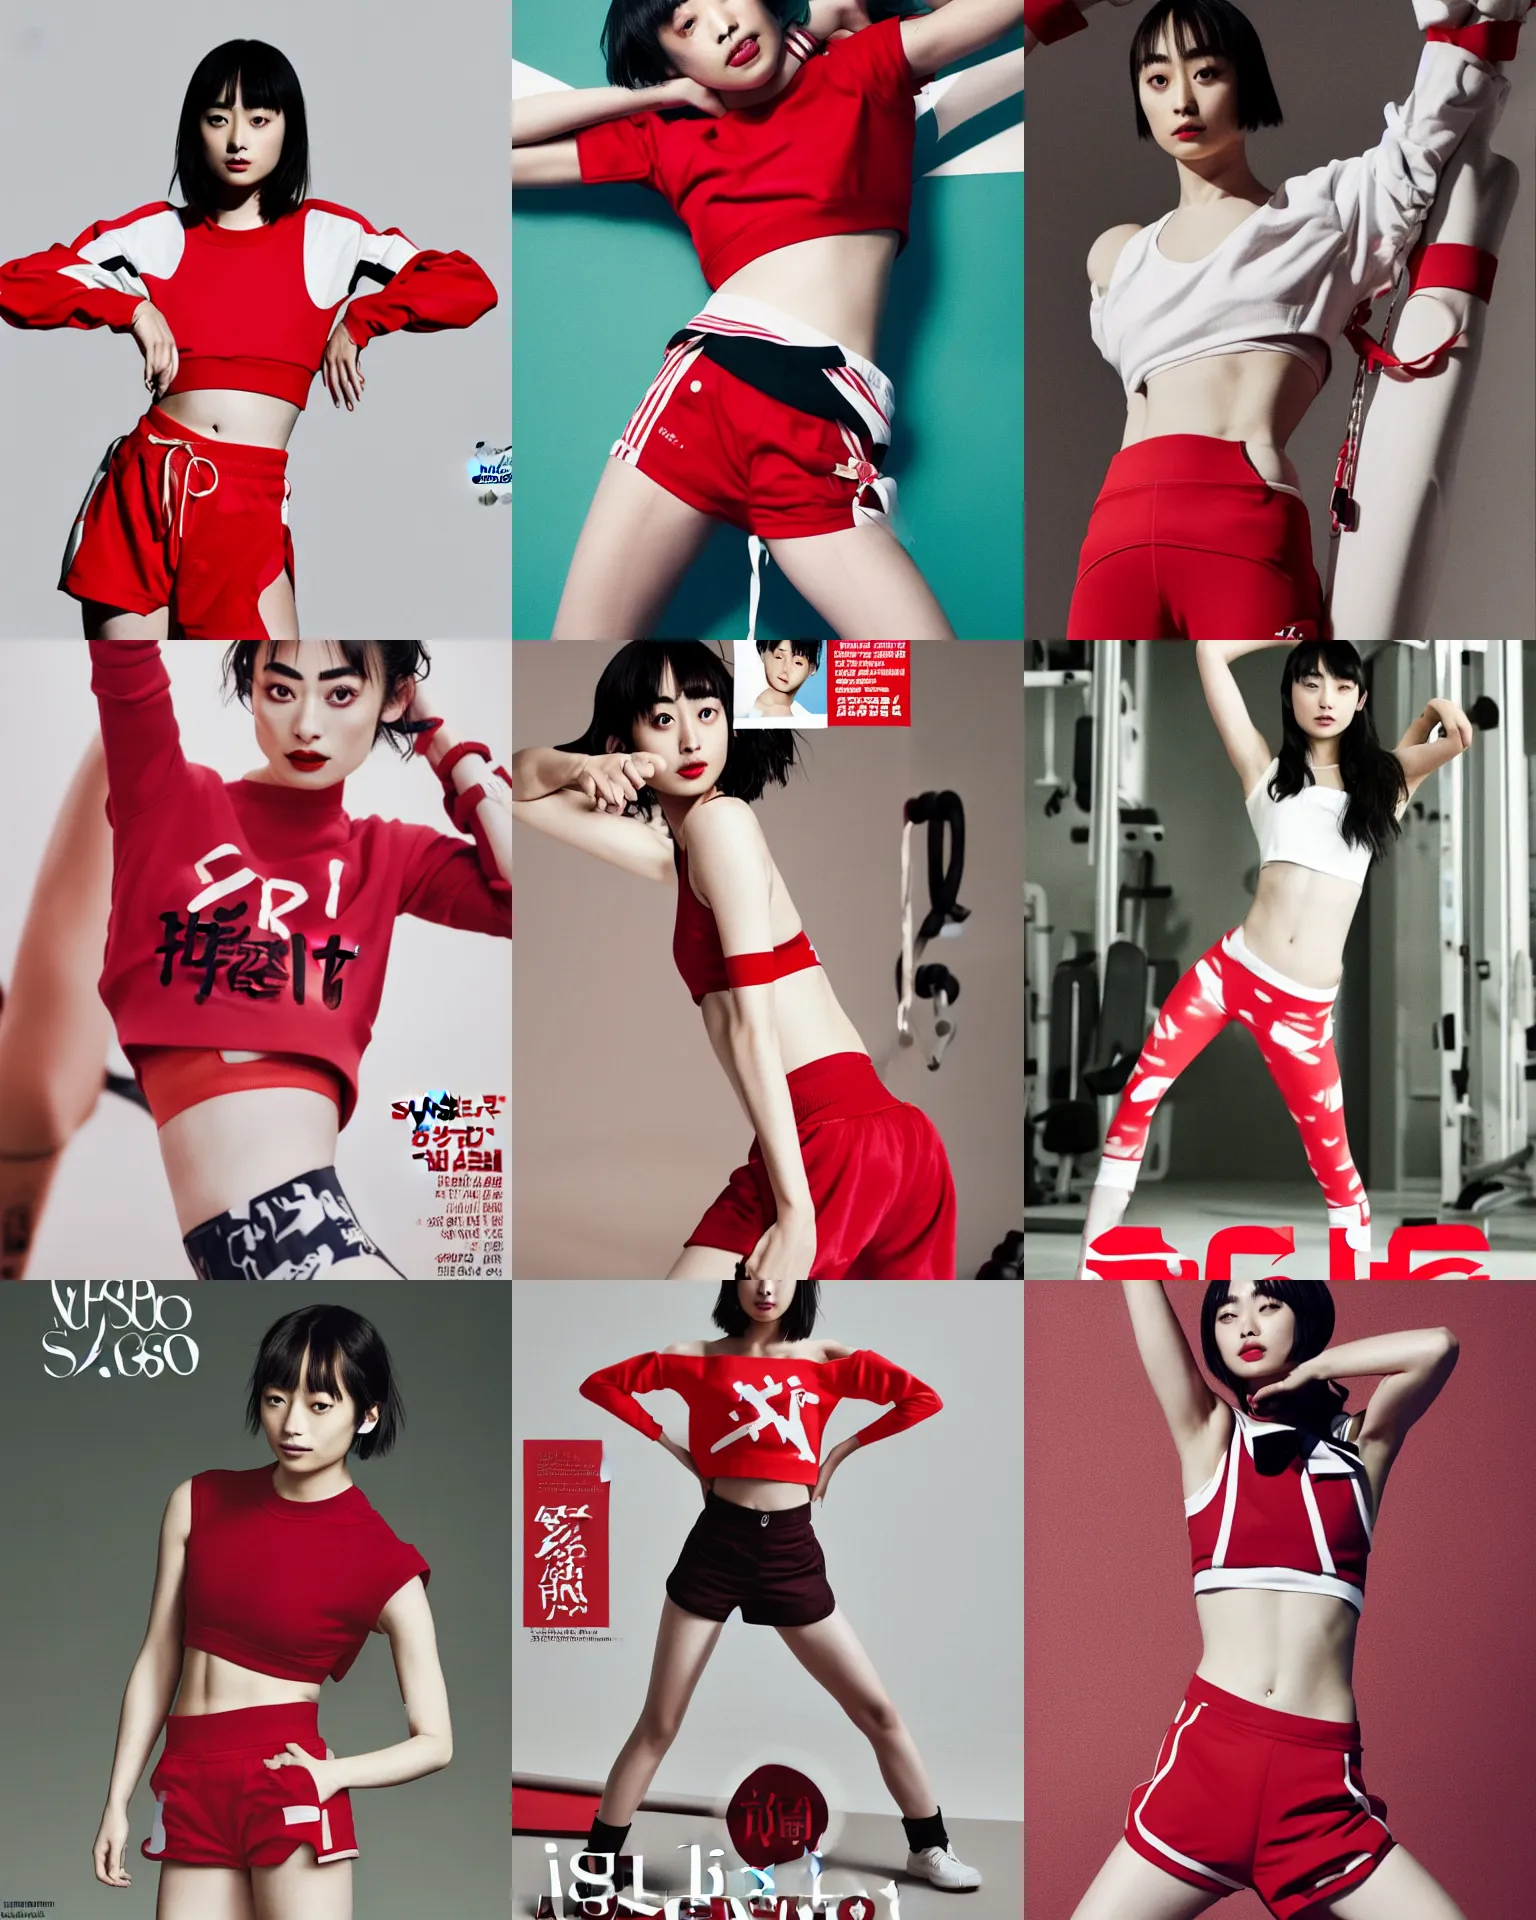 Prompt: suzu Hirose wearing crop red gym top with white lettering, cropped red yoga short, advertising editorial by Mario Testino, masterwork